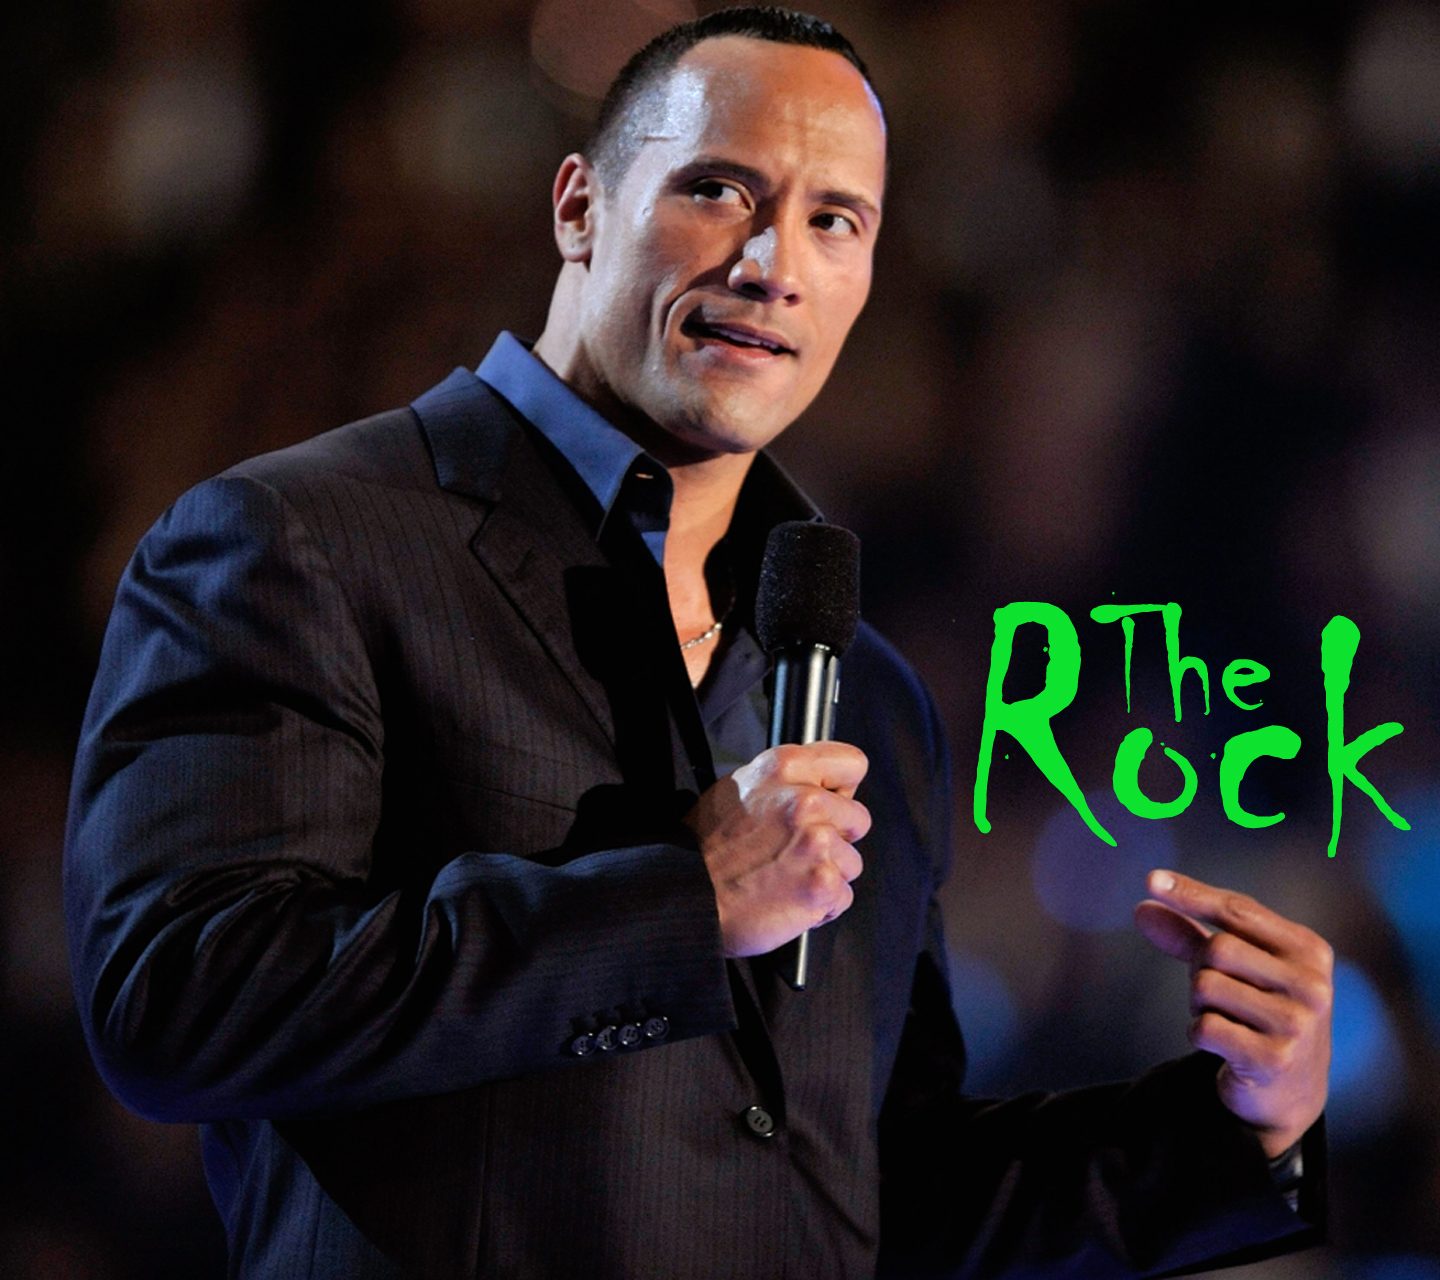 latest movie the rock wallpapers 1080p for desktop | Full HD Imagess